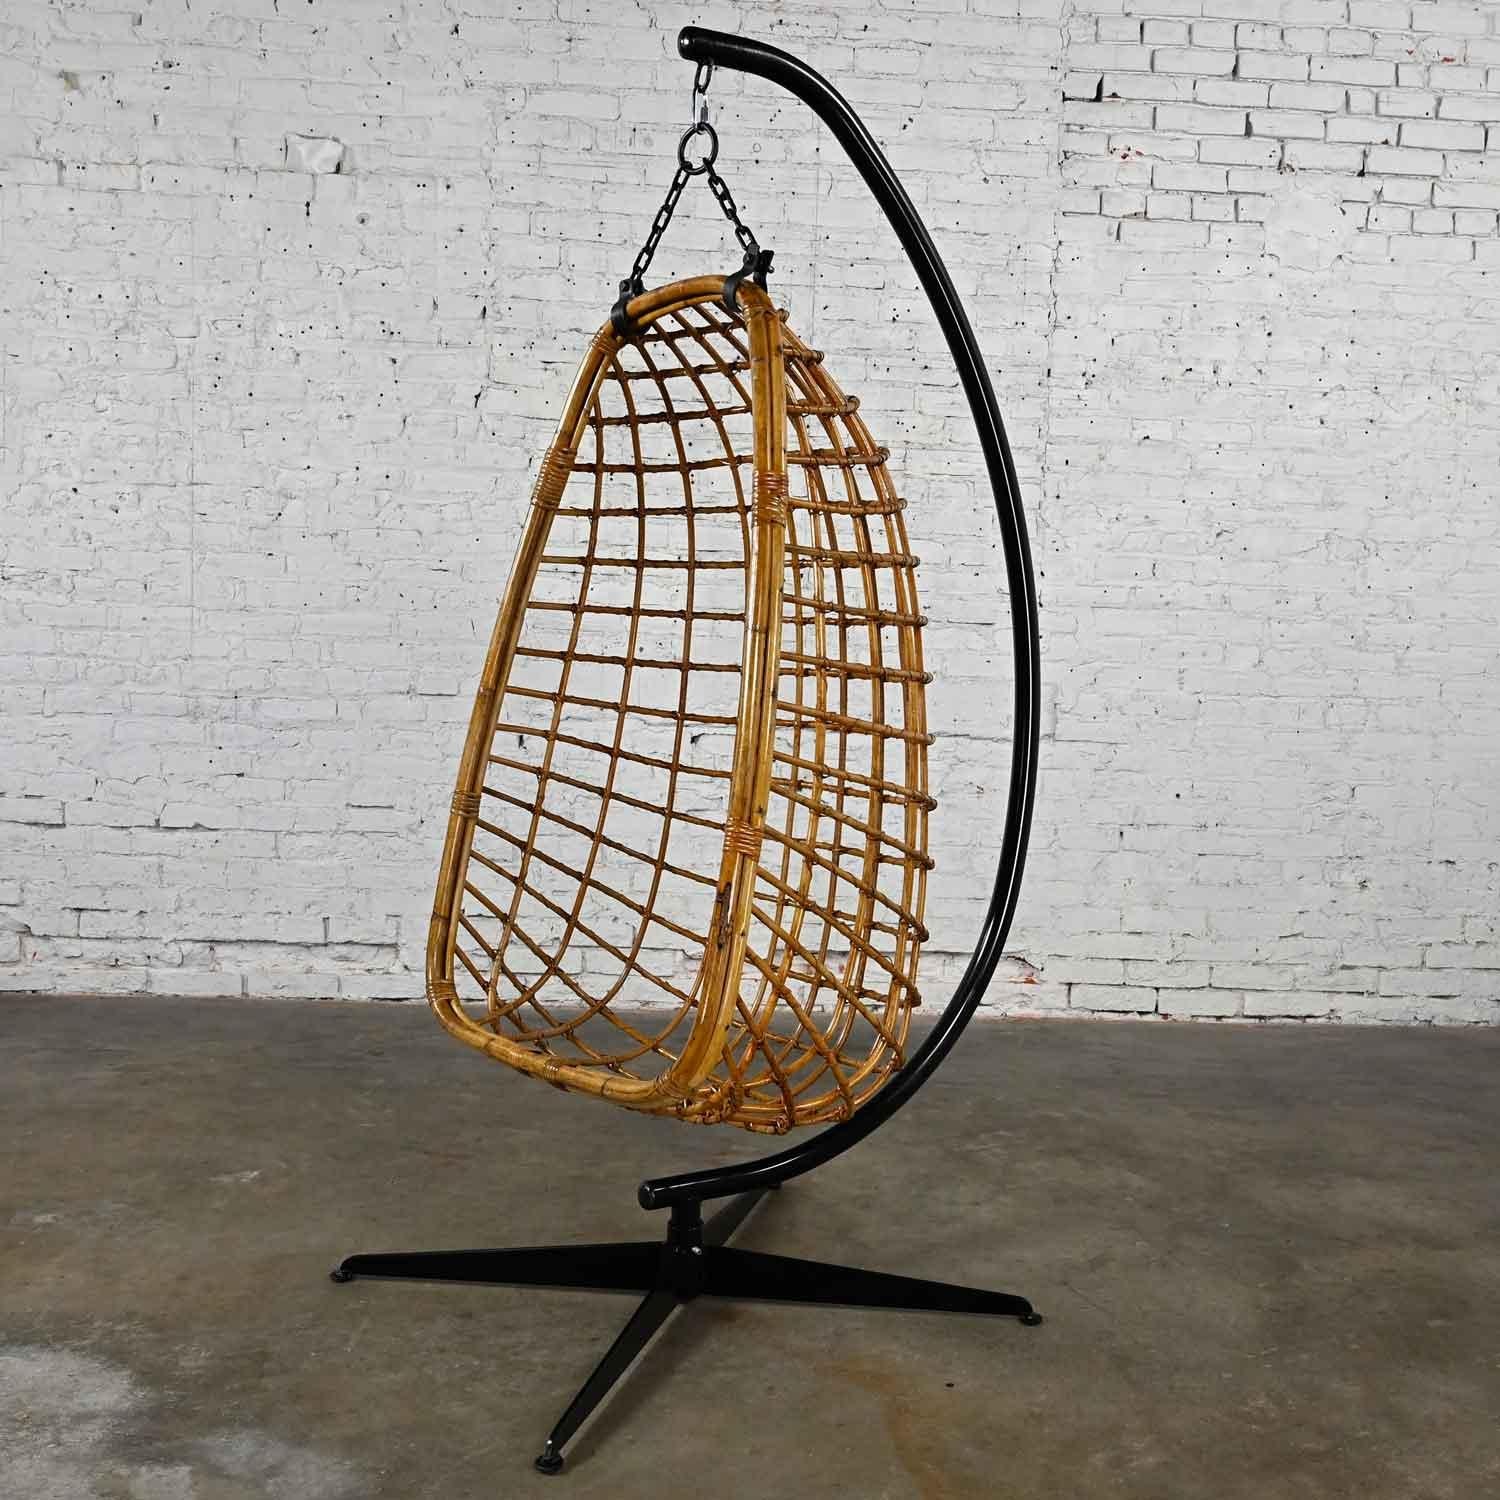 Awesome vintage Mid-Century Modern wicker rattan hanging basket chair and black painted stand. Beautiful condition, keeping in mind that this is vintage and not new so will have signs of use and wear. The basket chair itself has a fresh coat of